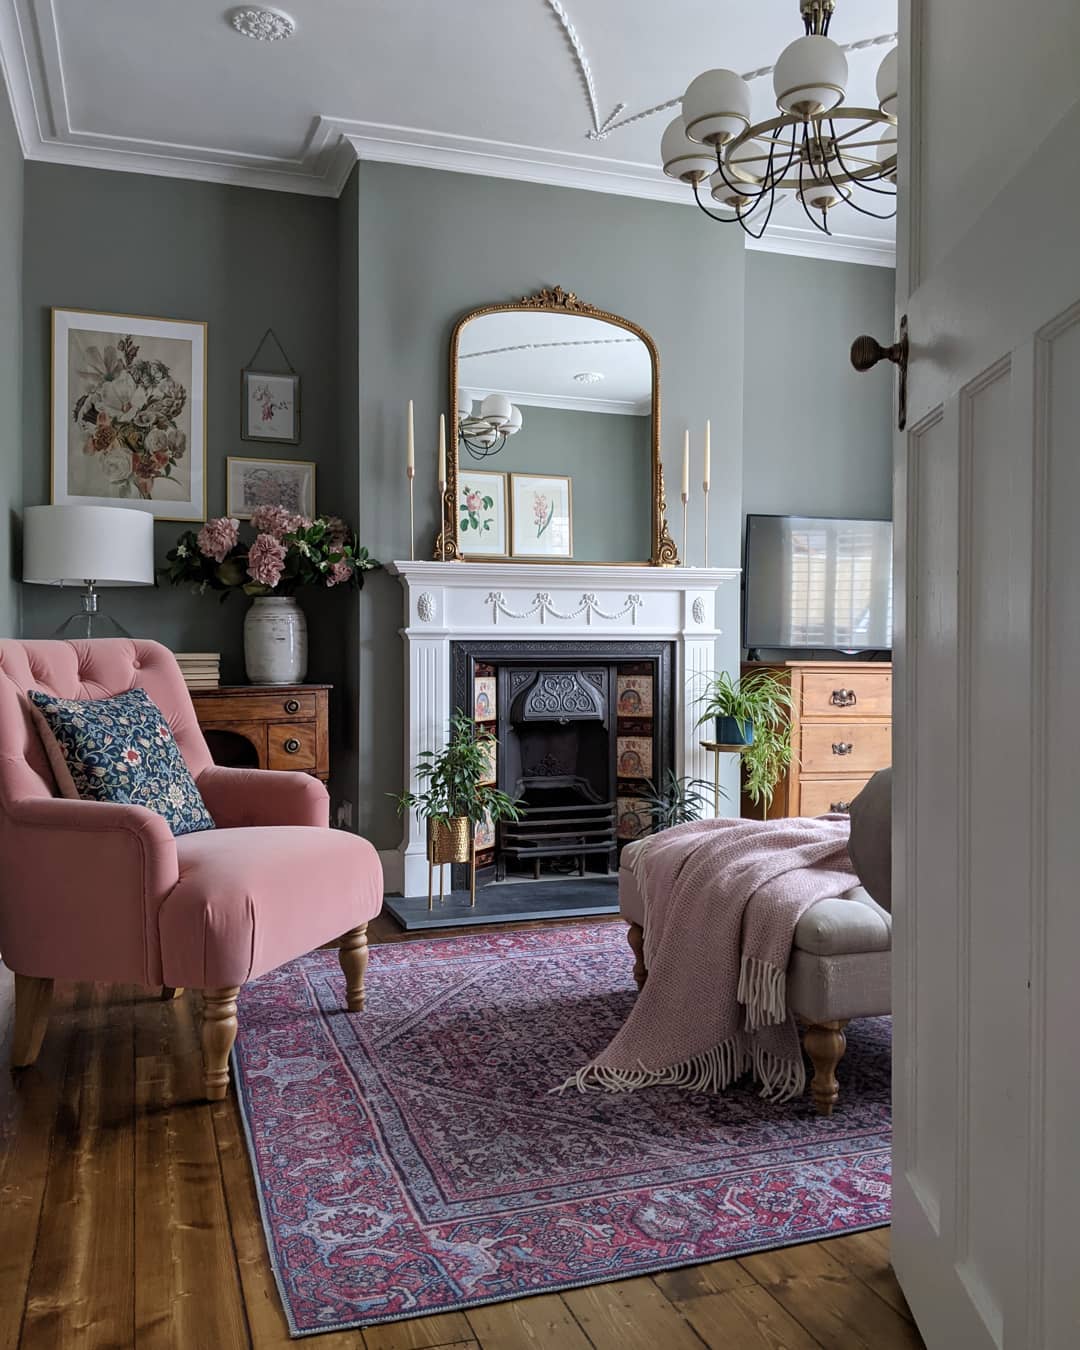 Traditional style living room with pink armchair and fireplace with a mirror above it